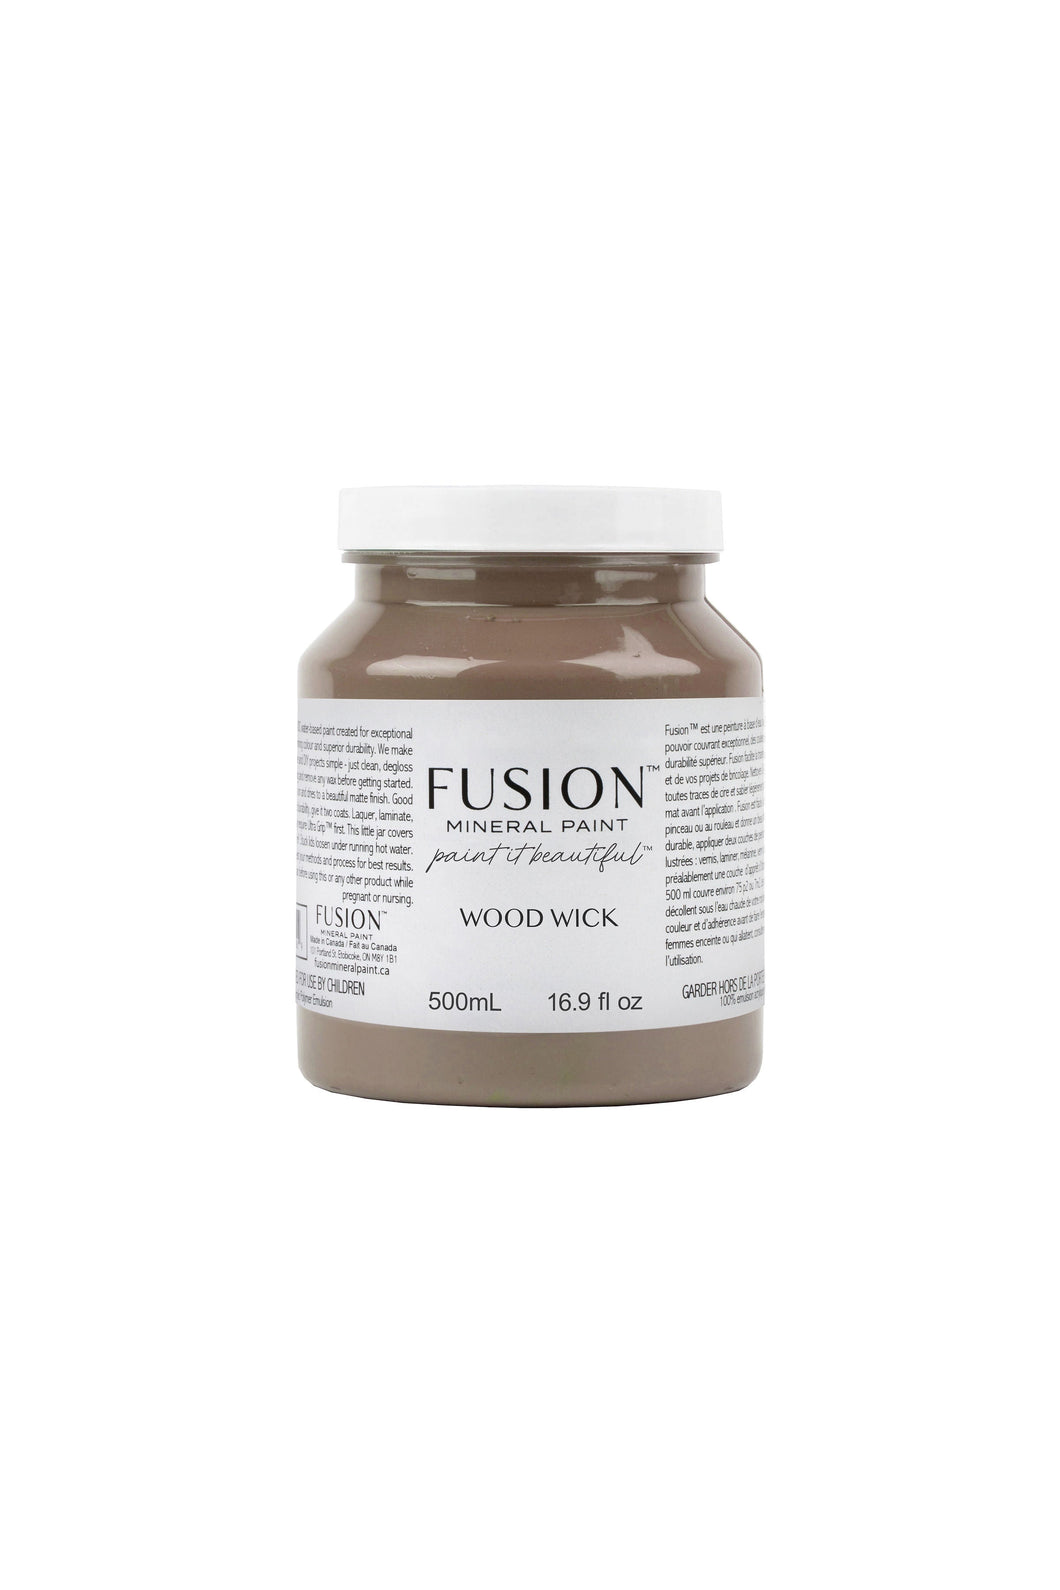 *NEW* Wood Wick Fusion Paint